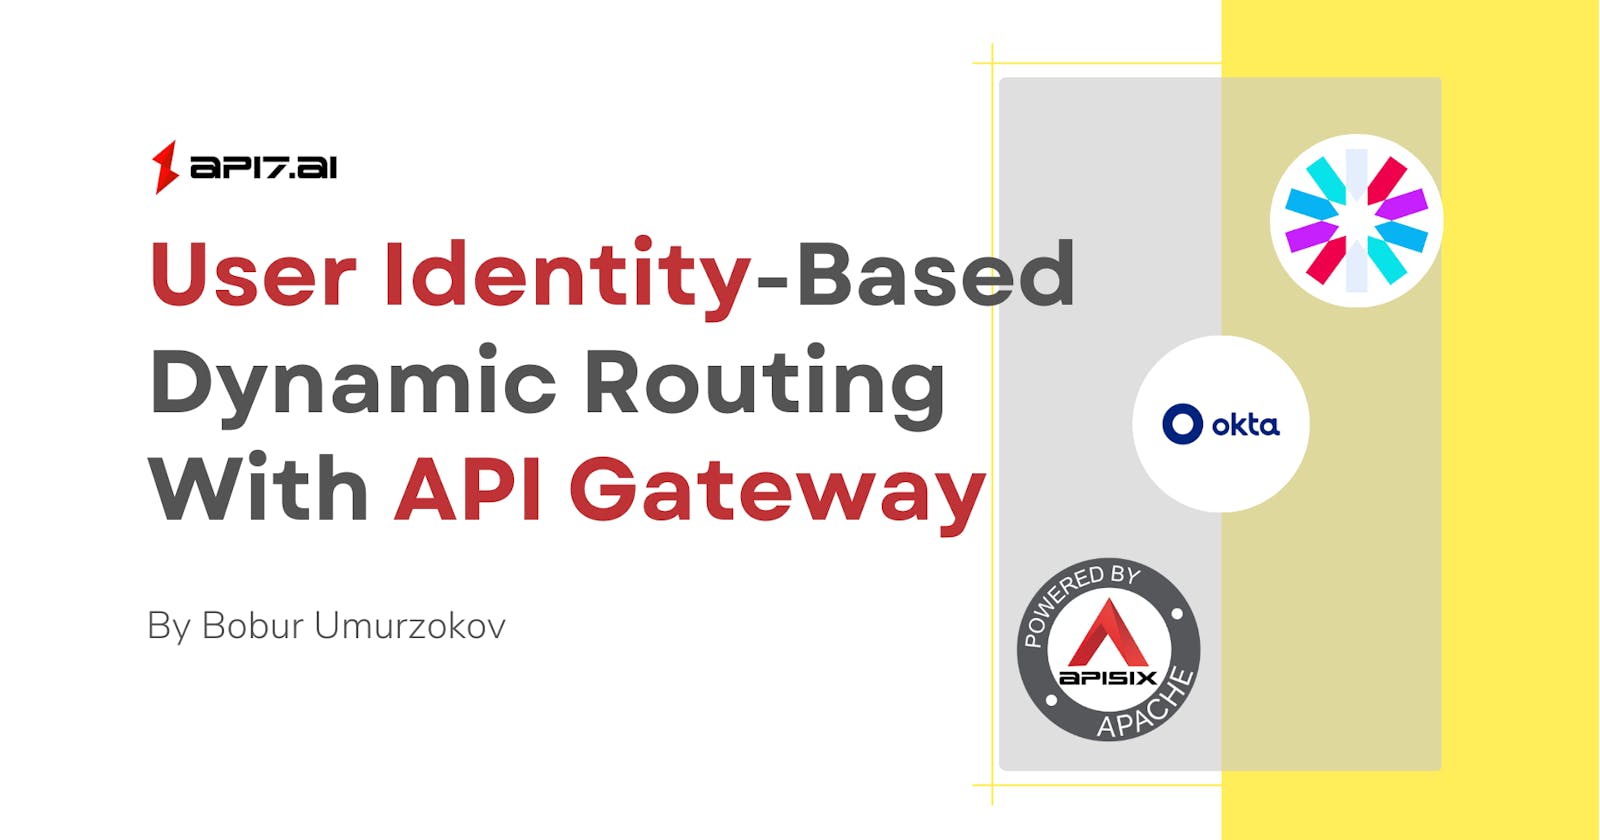 Dynamic routing based on user credentials with API Gateway